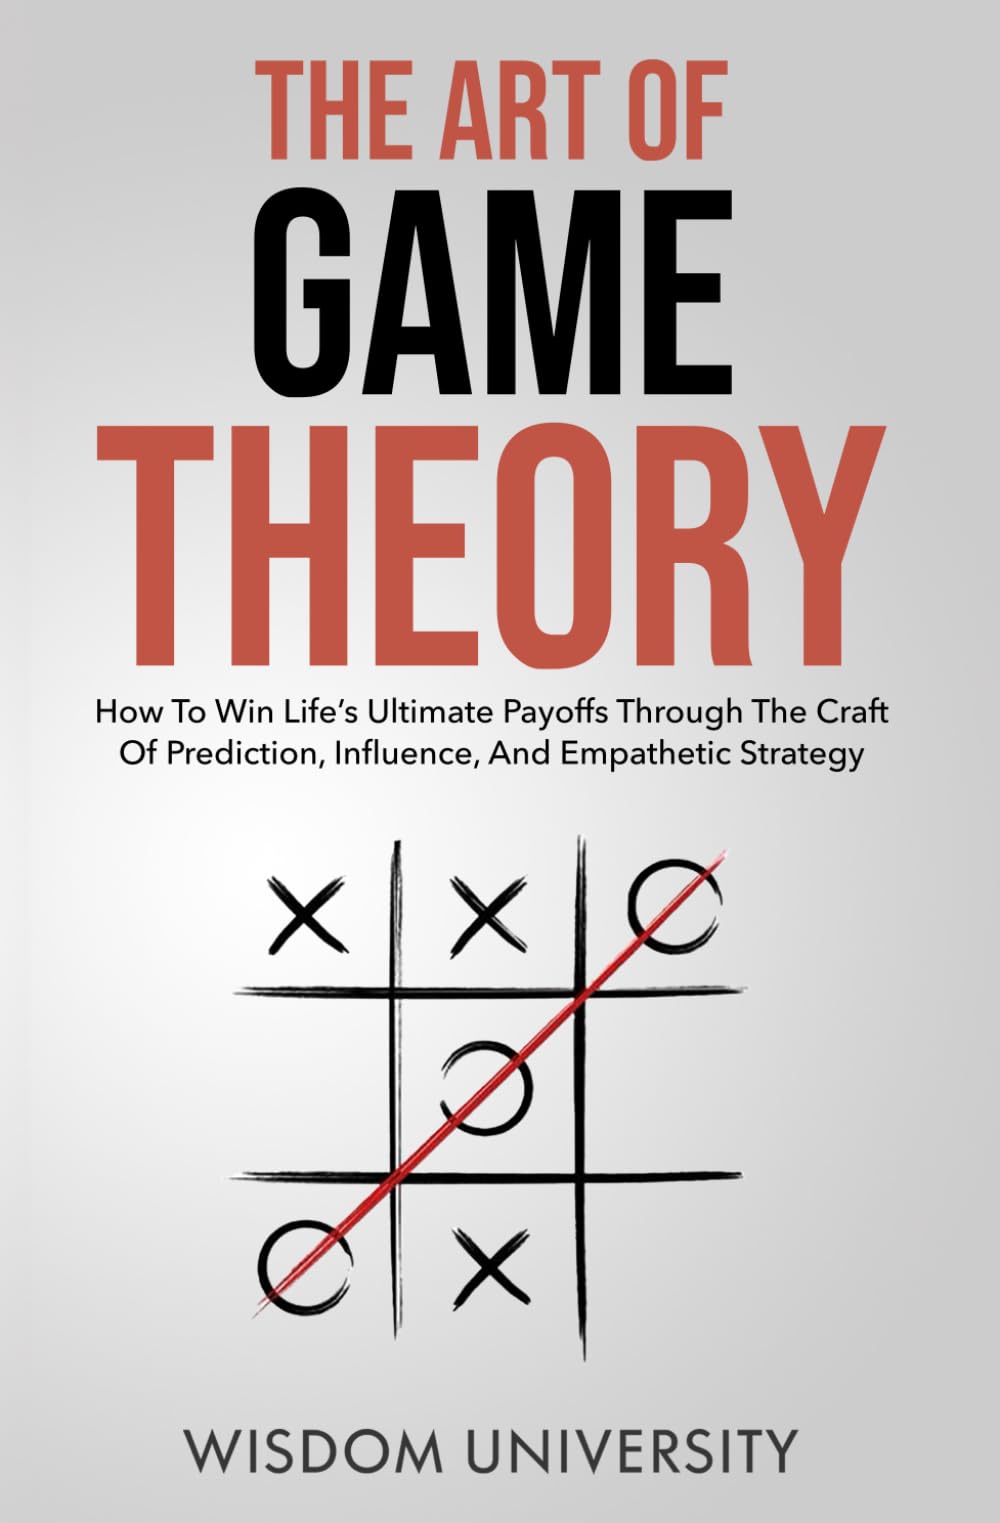 The Art Of Game Theory: How To Win Life’s Ultimate Payoffs Through The Craft Of Prediction, Influence, And Empathetic Strategy (Navigate The Labyrinth Of Decision Complexity)